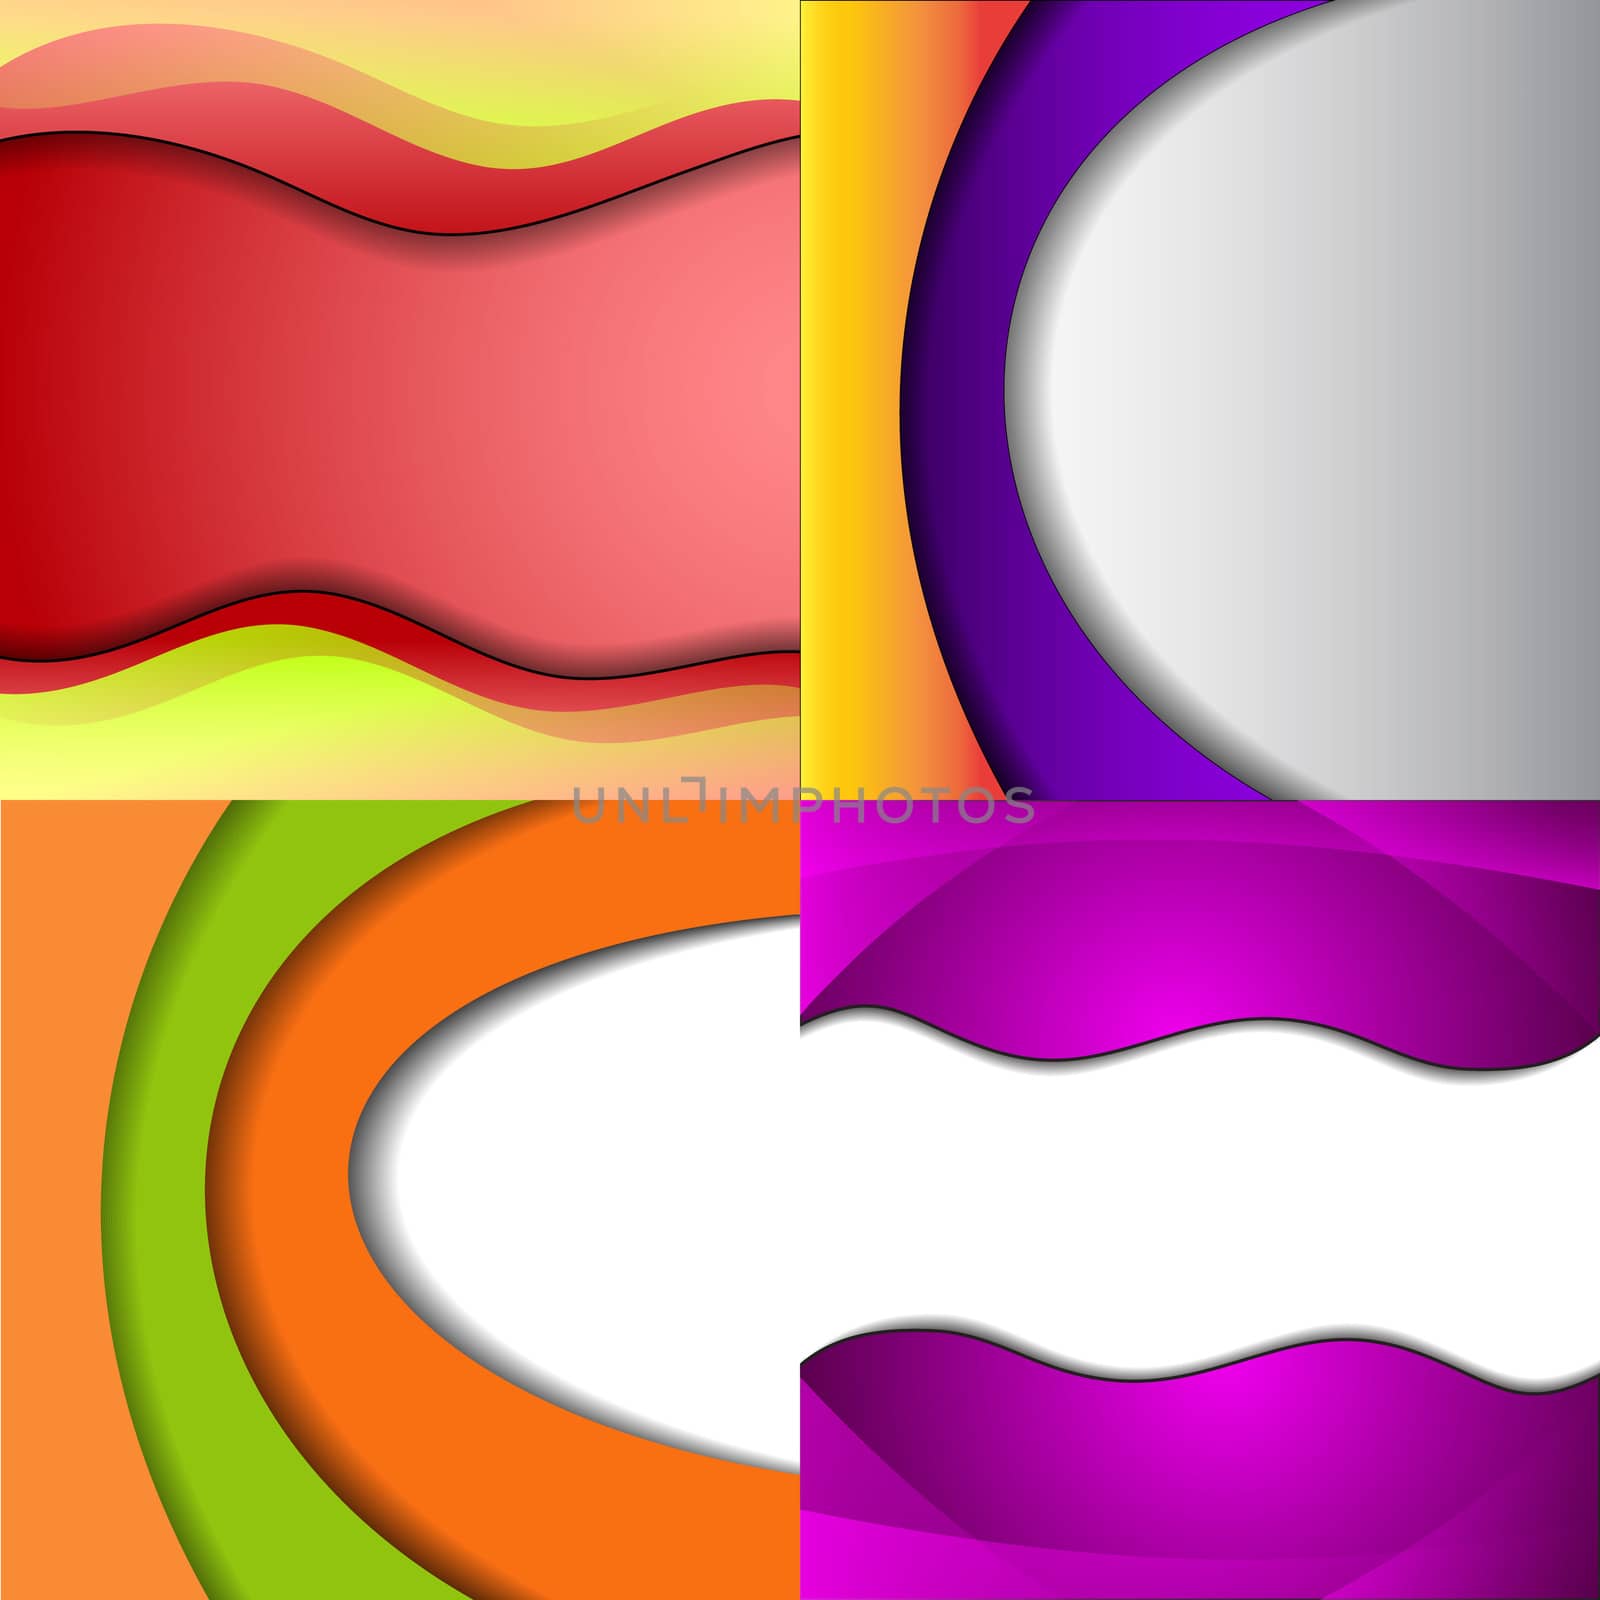 Set of bright abstract backgrounds. Design eps 10.  illustration